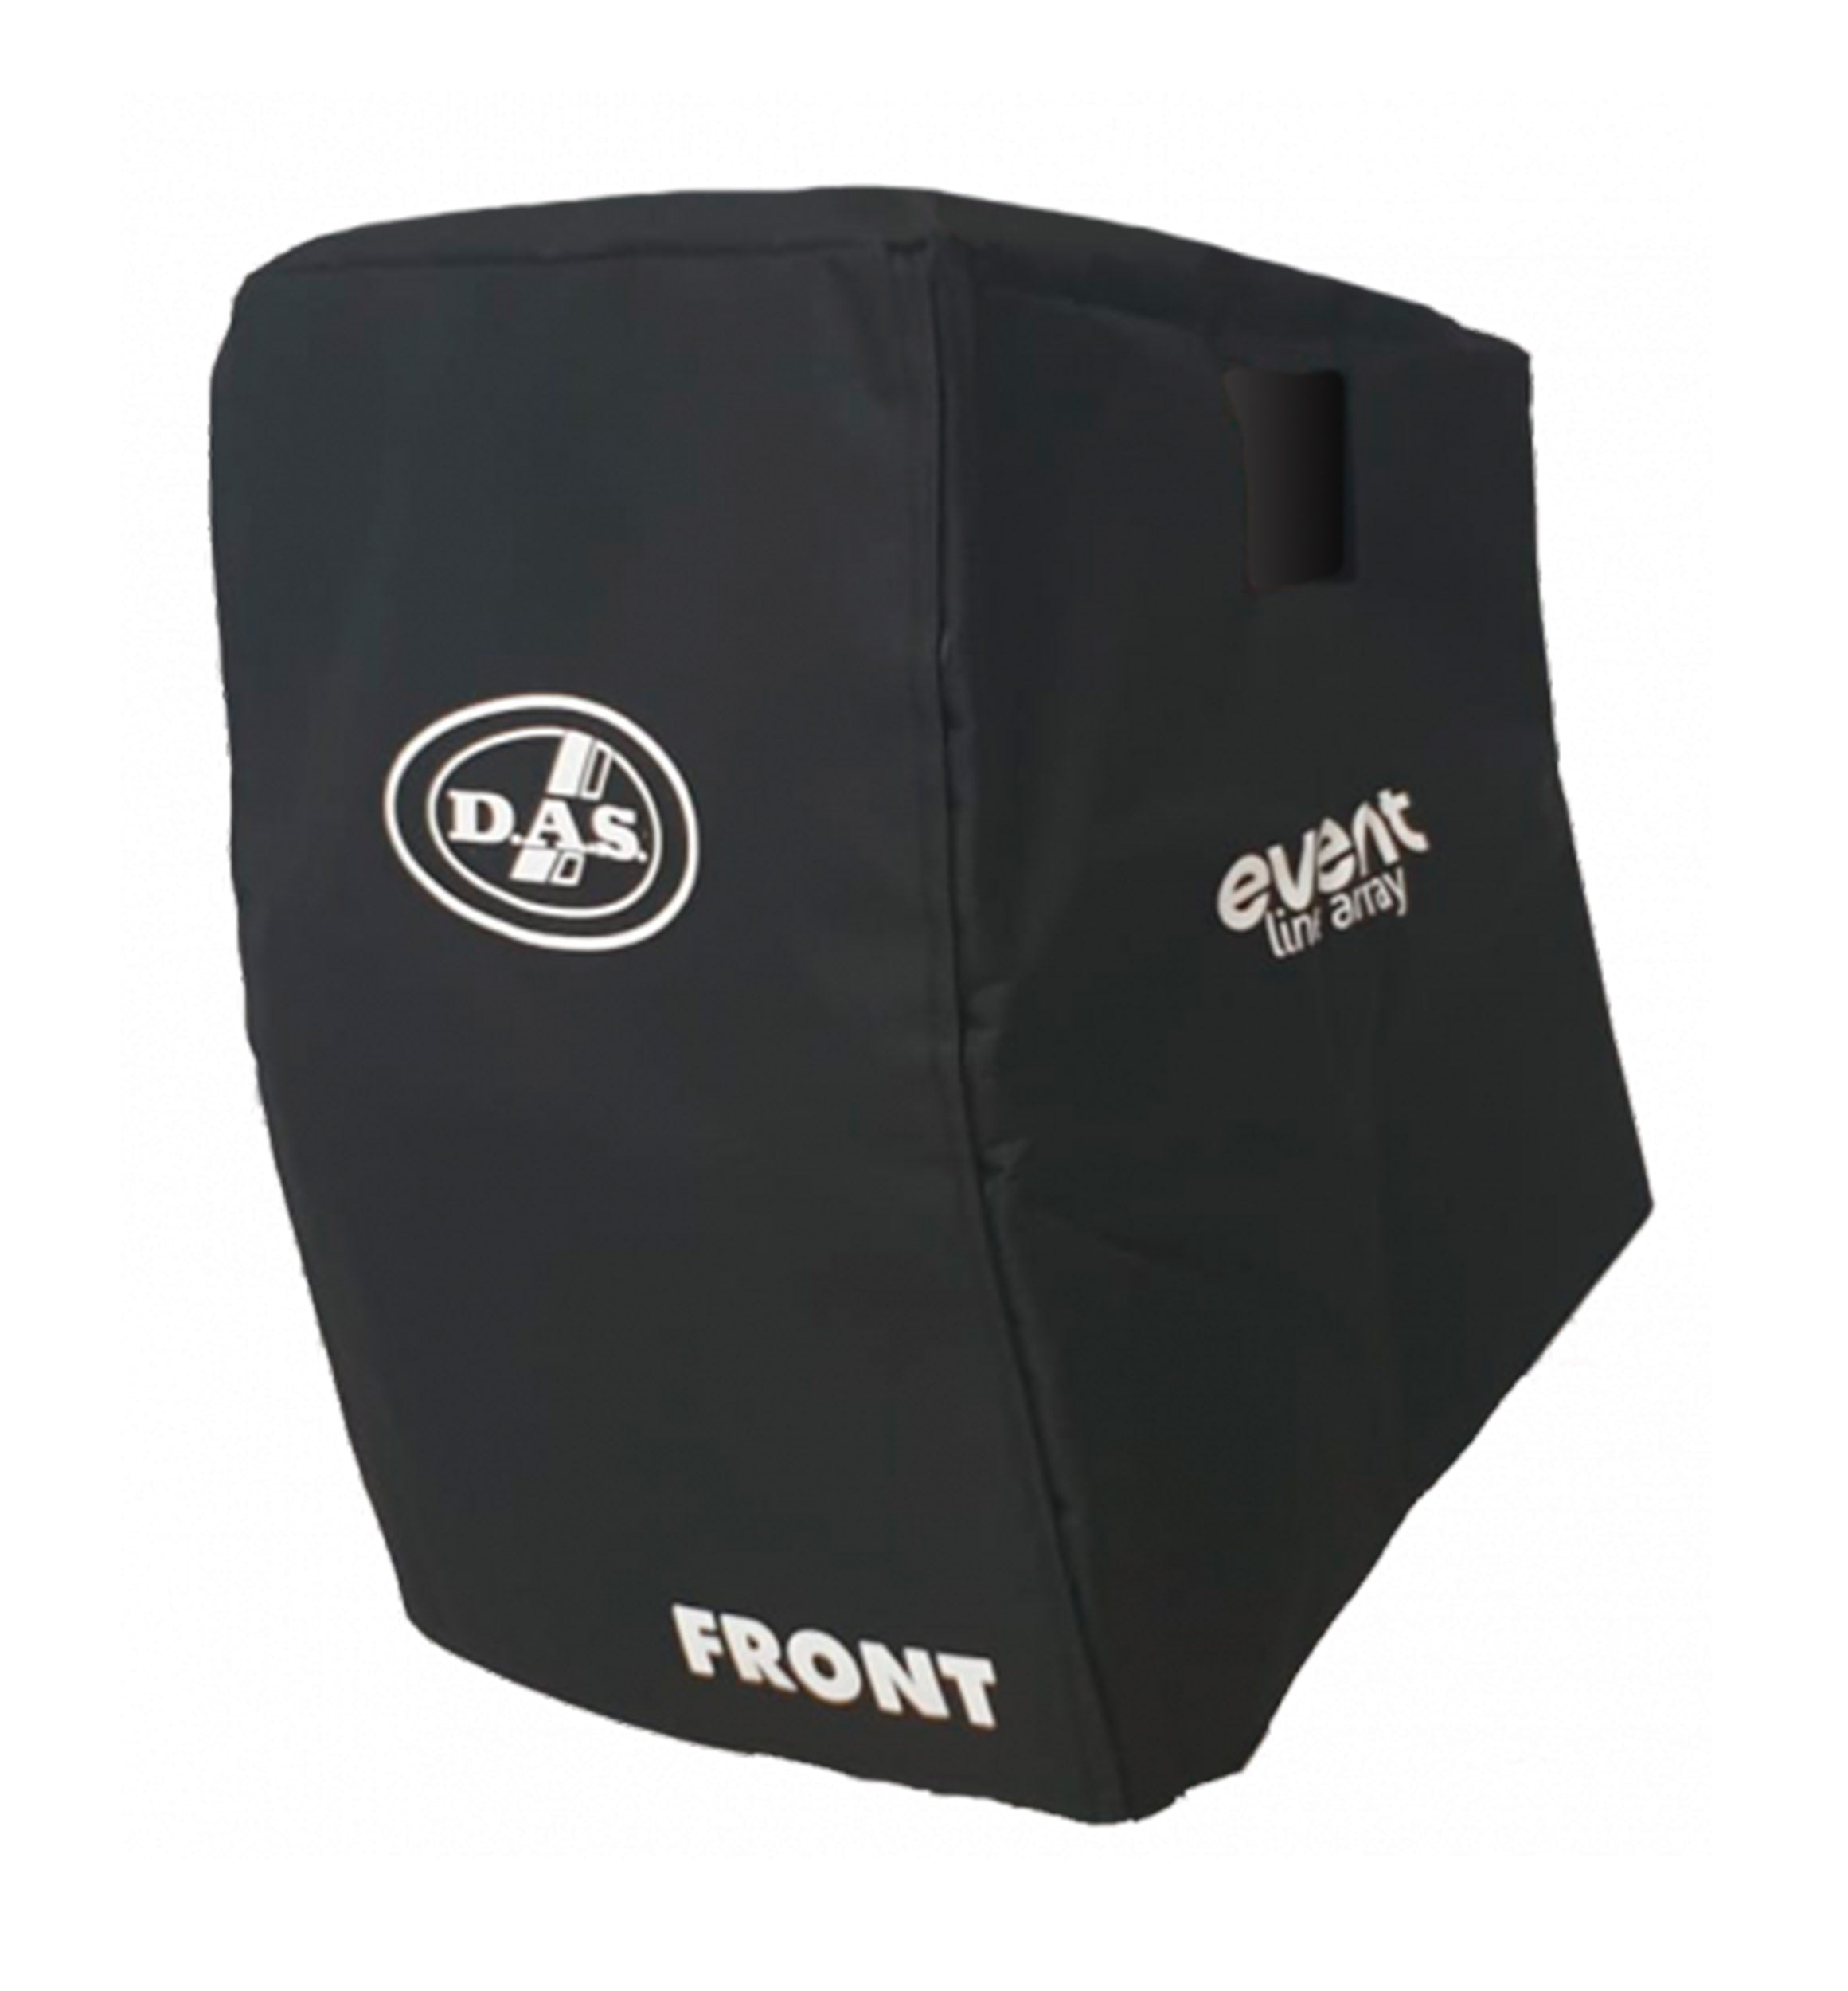 DAS Audio FUN-4-EV26, Protective Transport Cover for 4x EVENT-26A 2-way Powered Line Array Speakers by DAS Audio